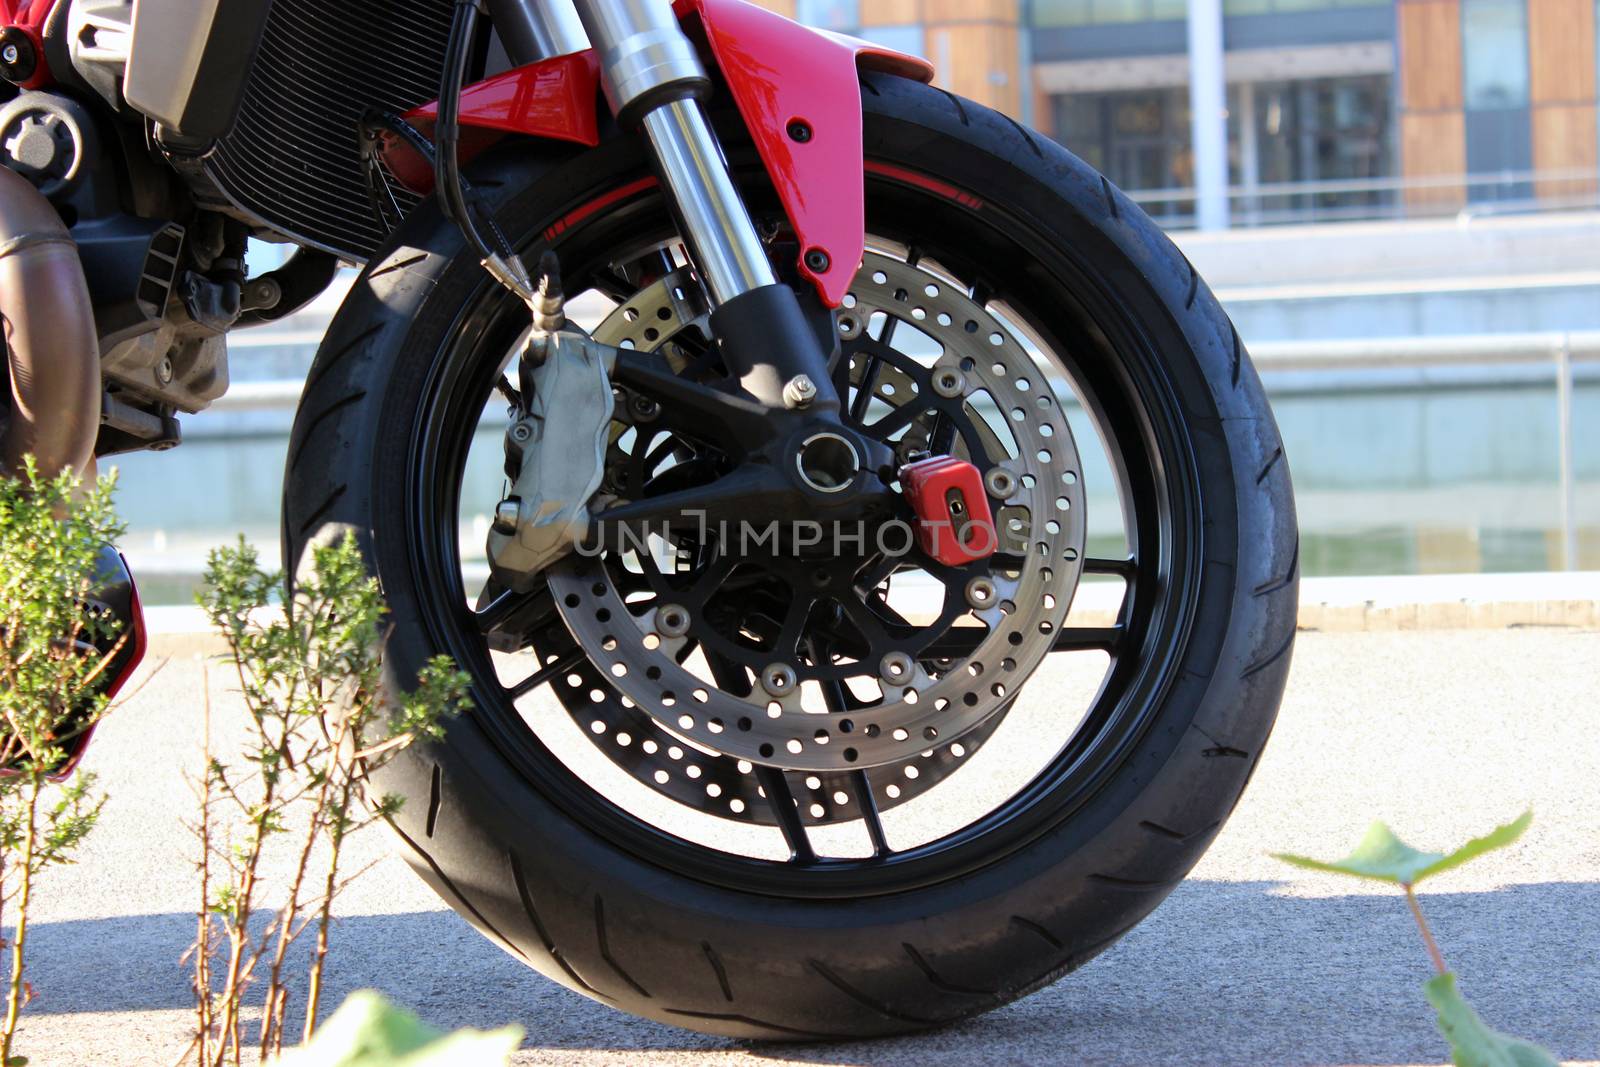 Close up of motocross motorcycle wheel with ABS brakes